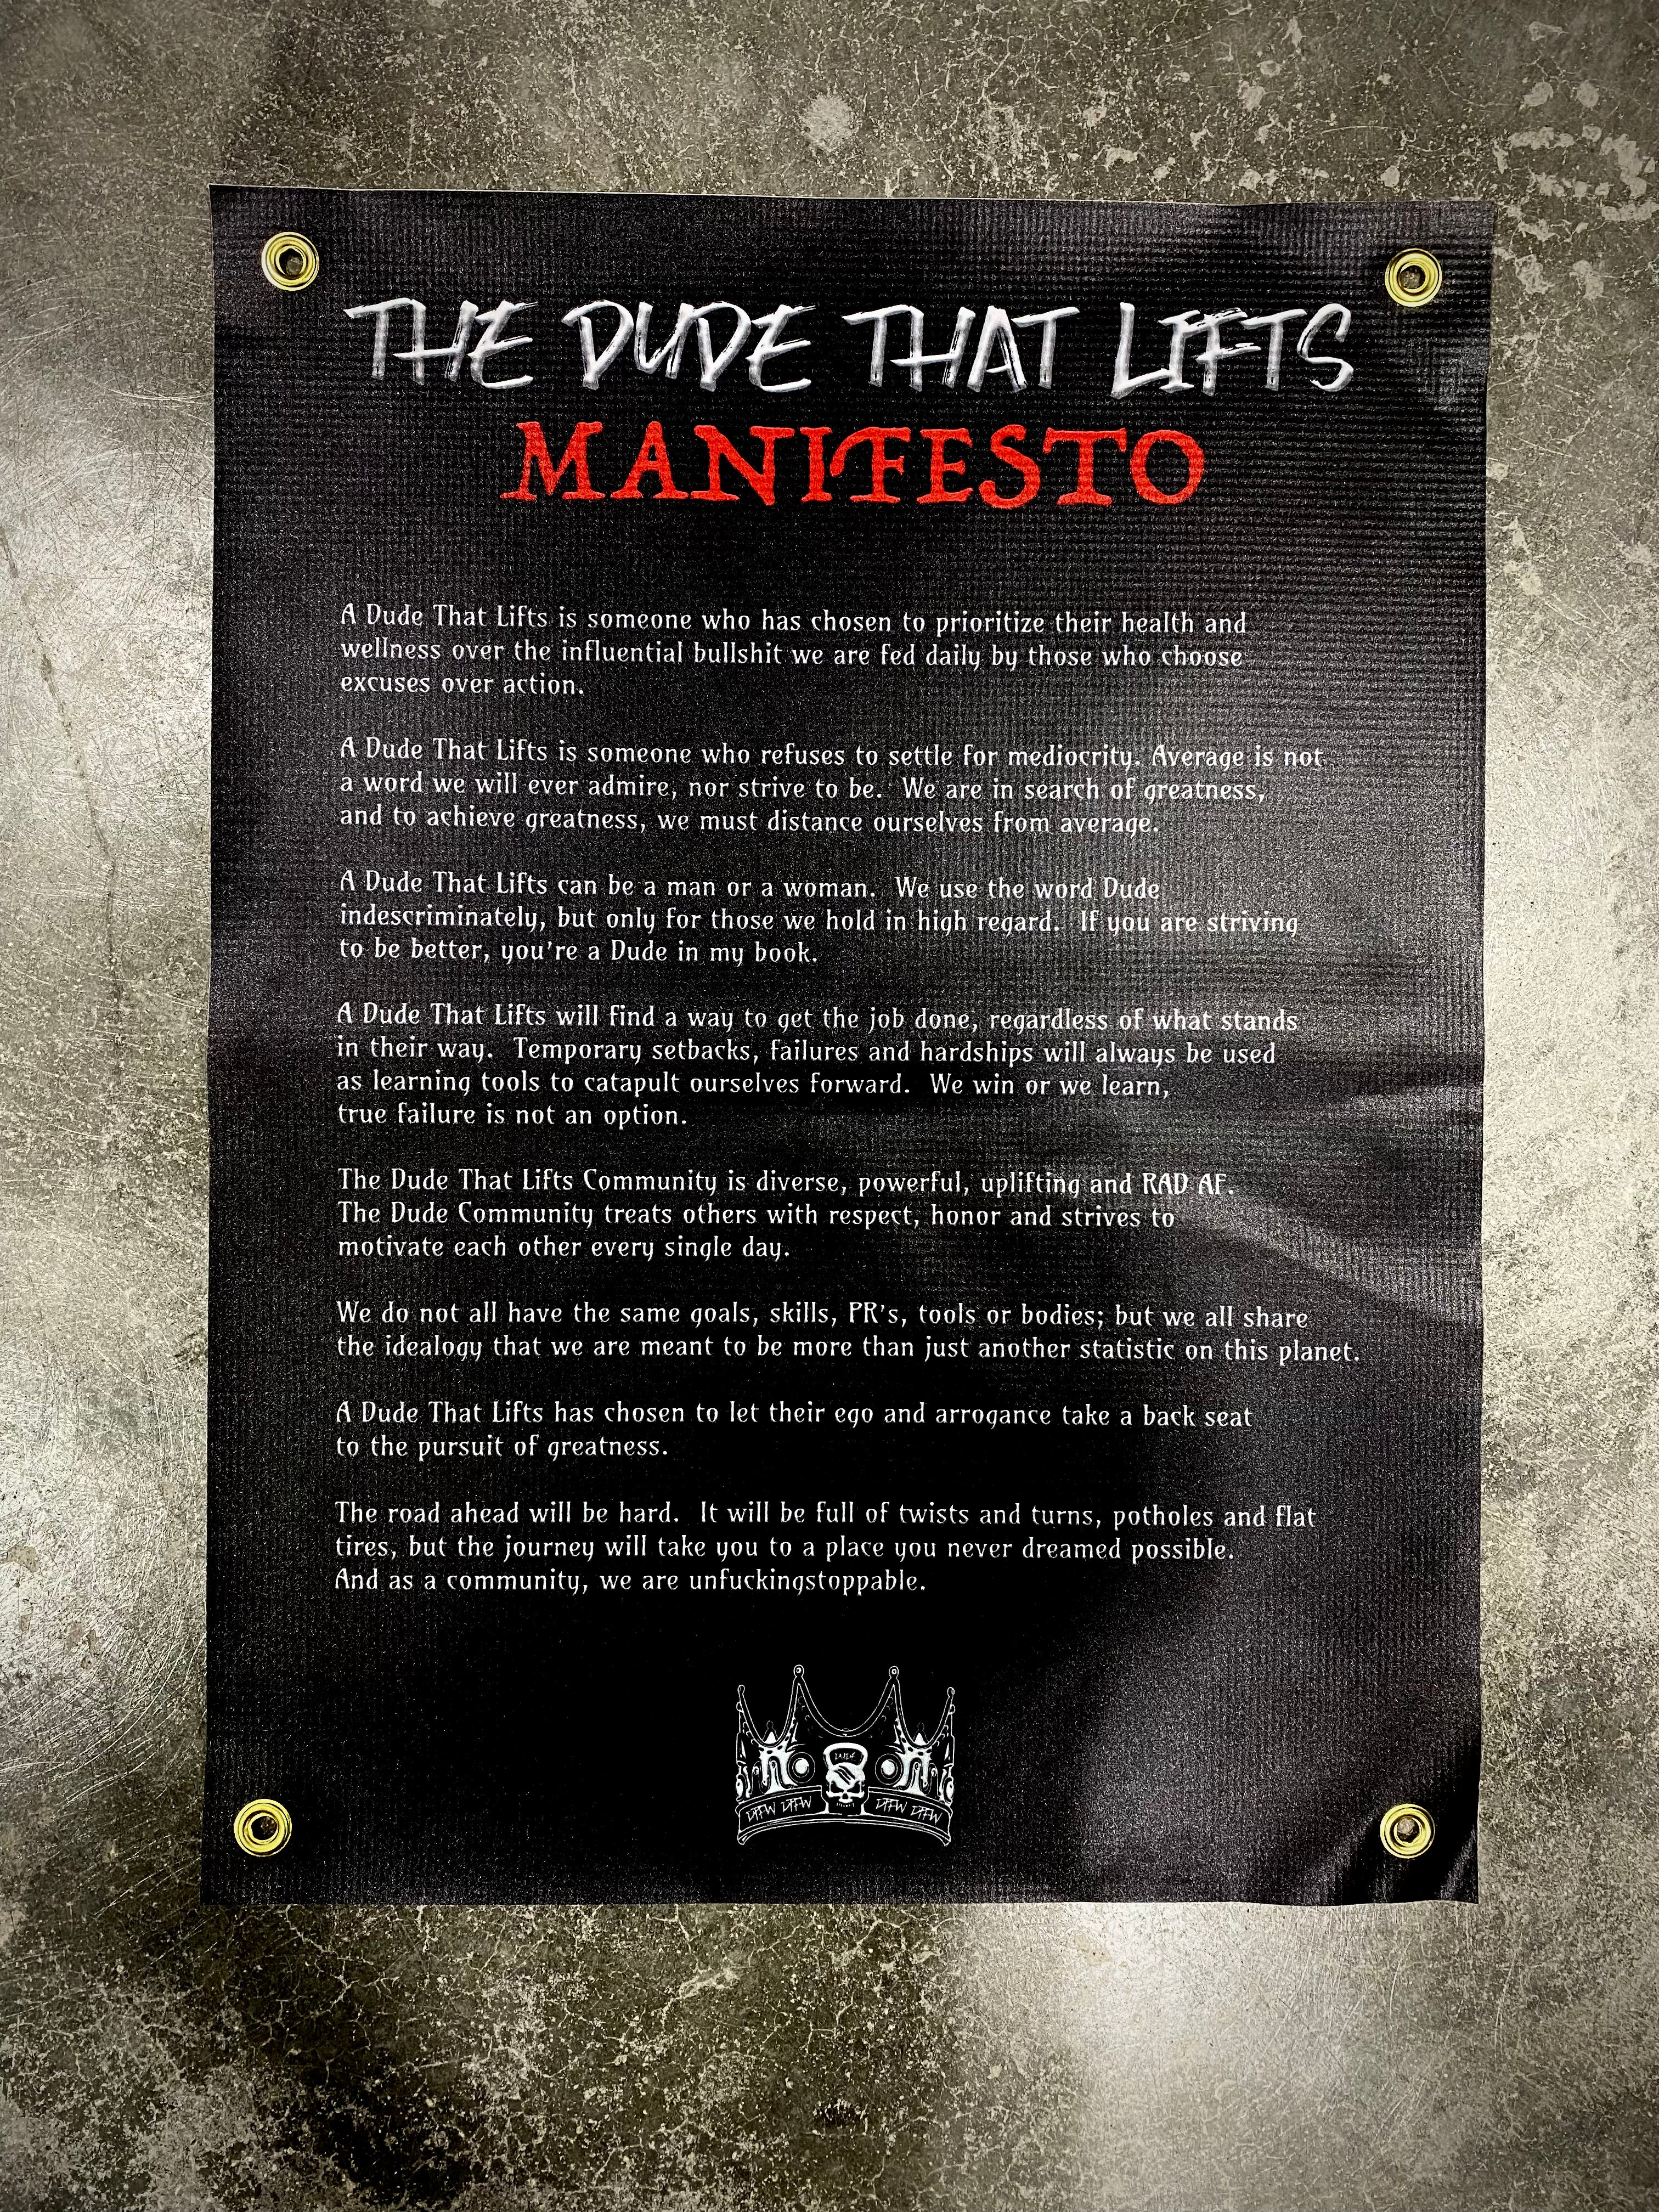 Dude Manifesto Wall Banner - Dude That Lifts